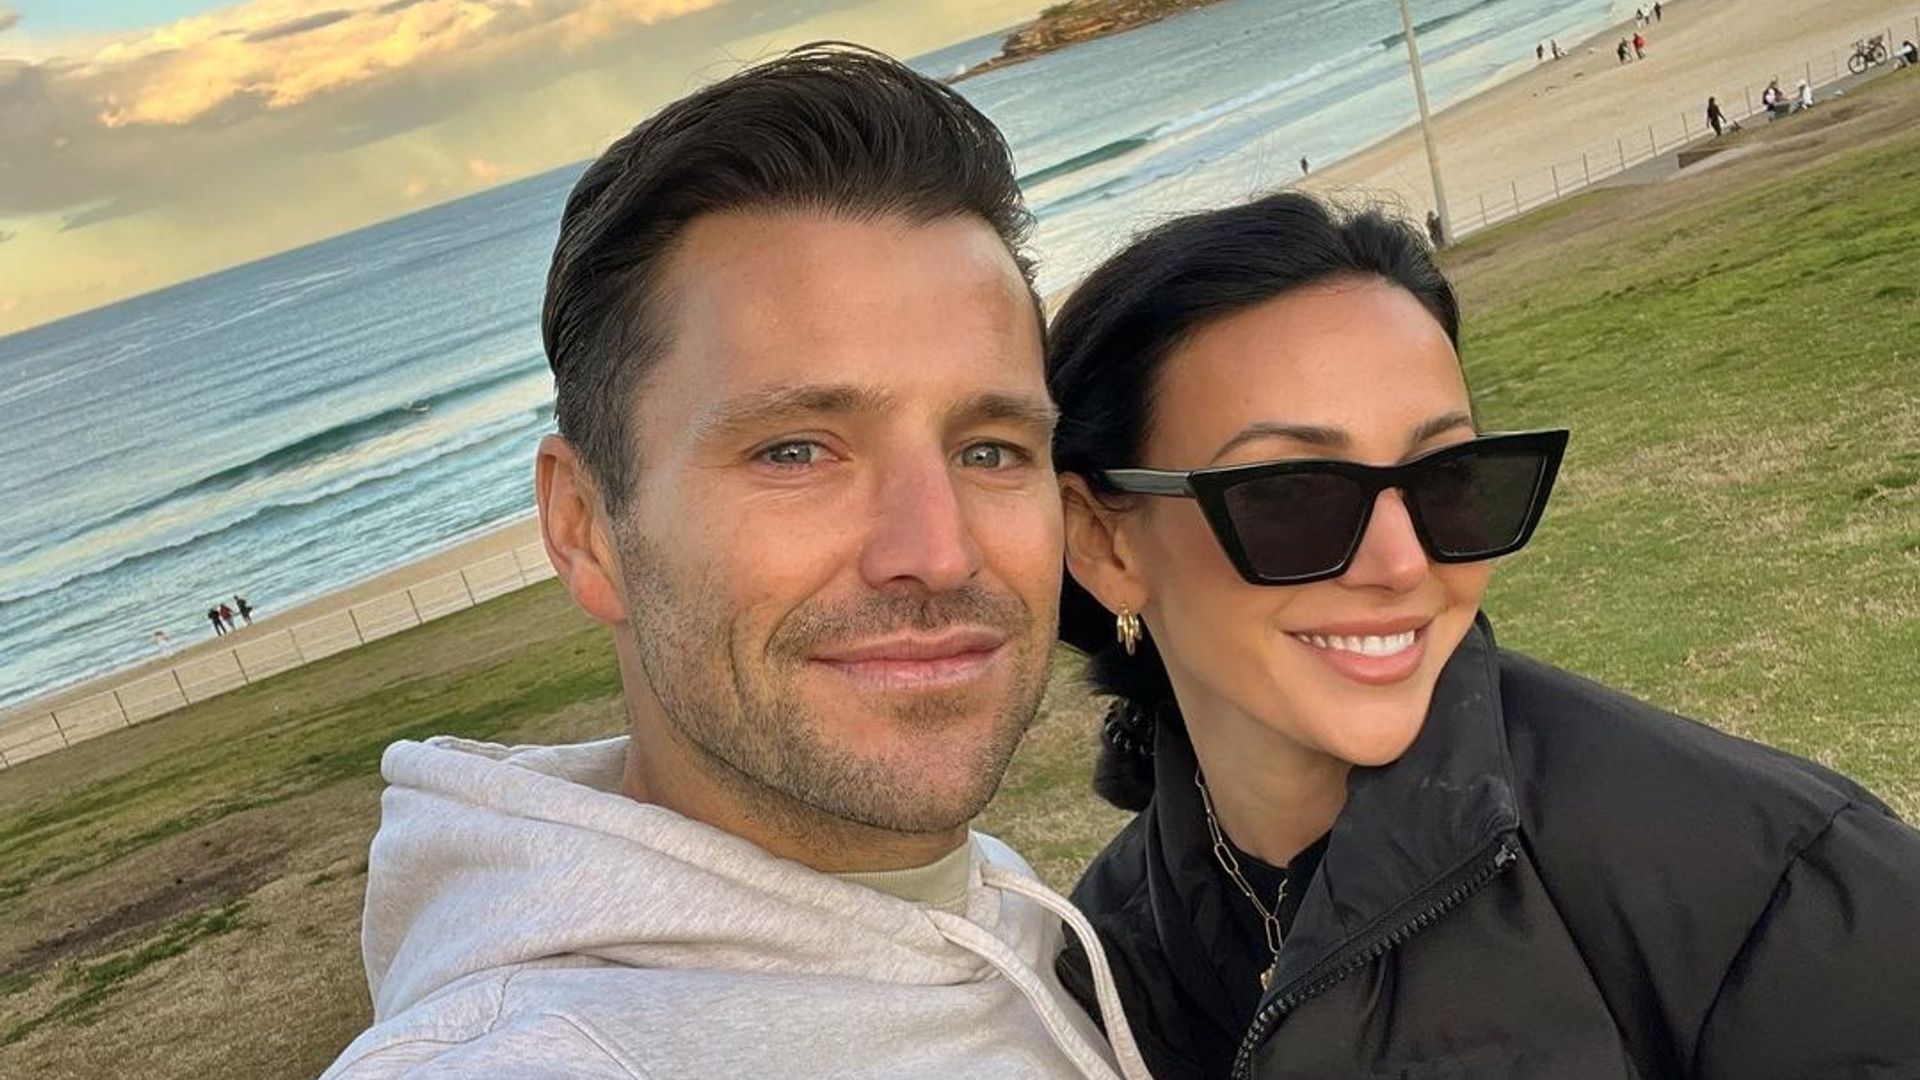 Mark shared this sweet selfie with wife Michelle during their time in Australia in 2022